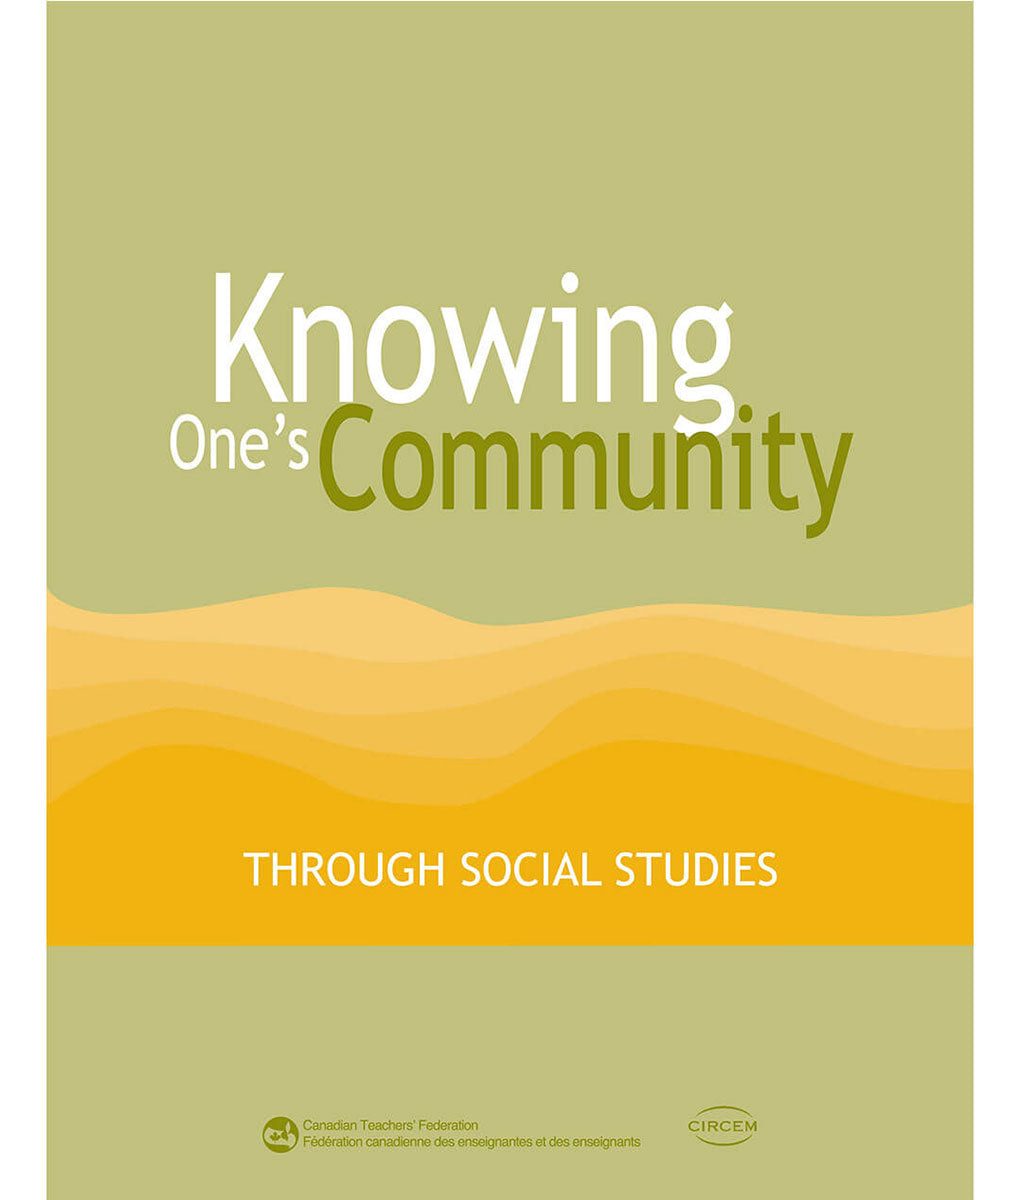 Knowing One’s Community Through Social Studies